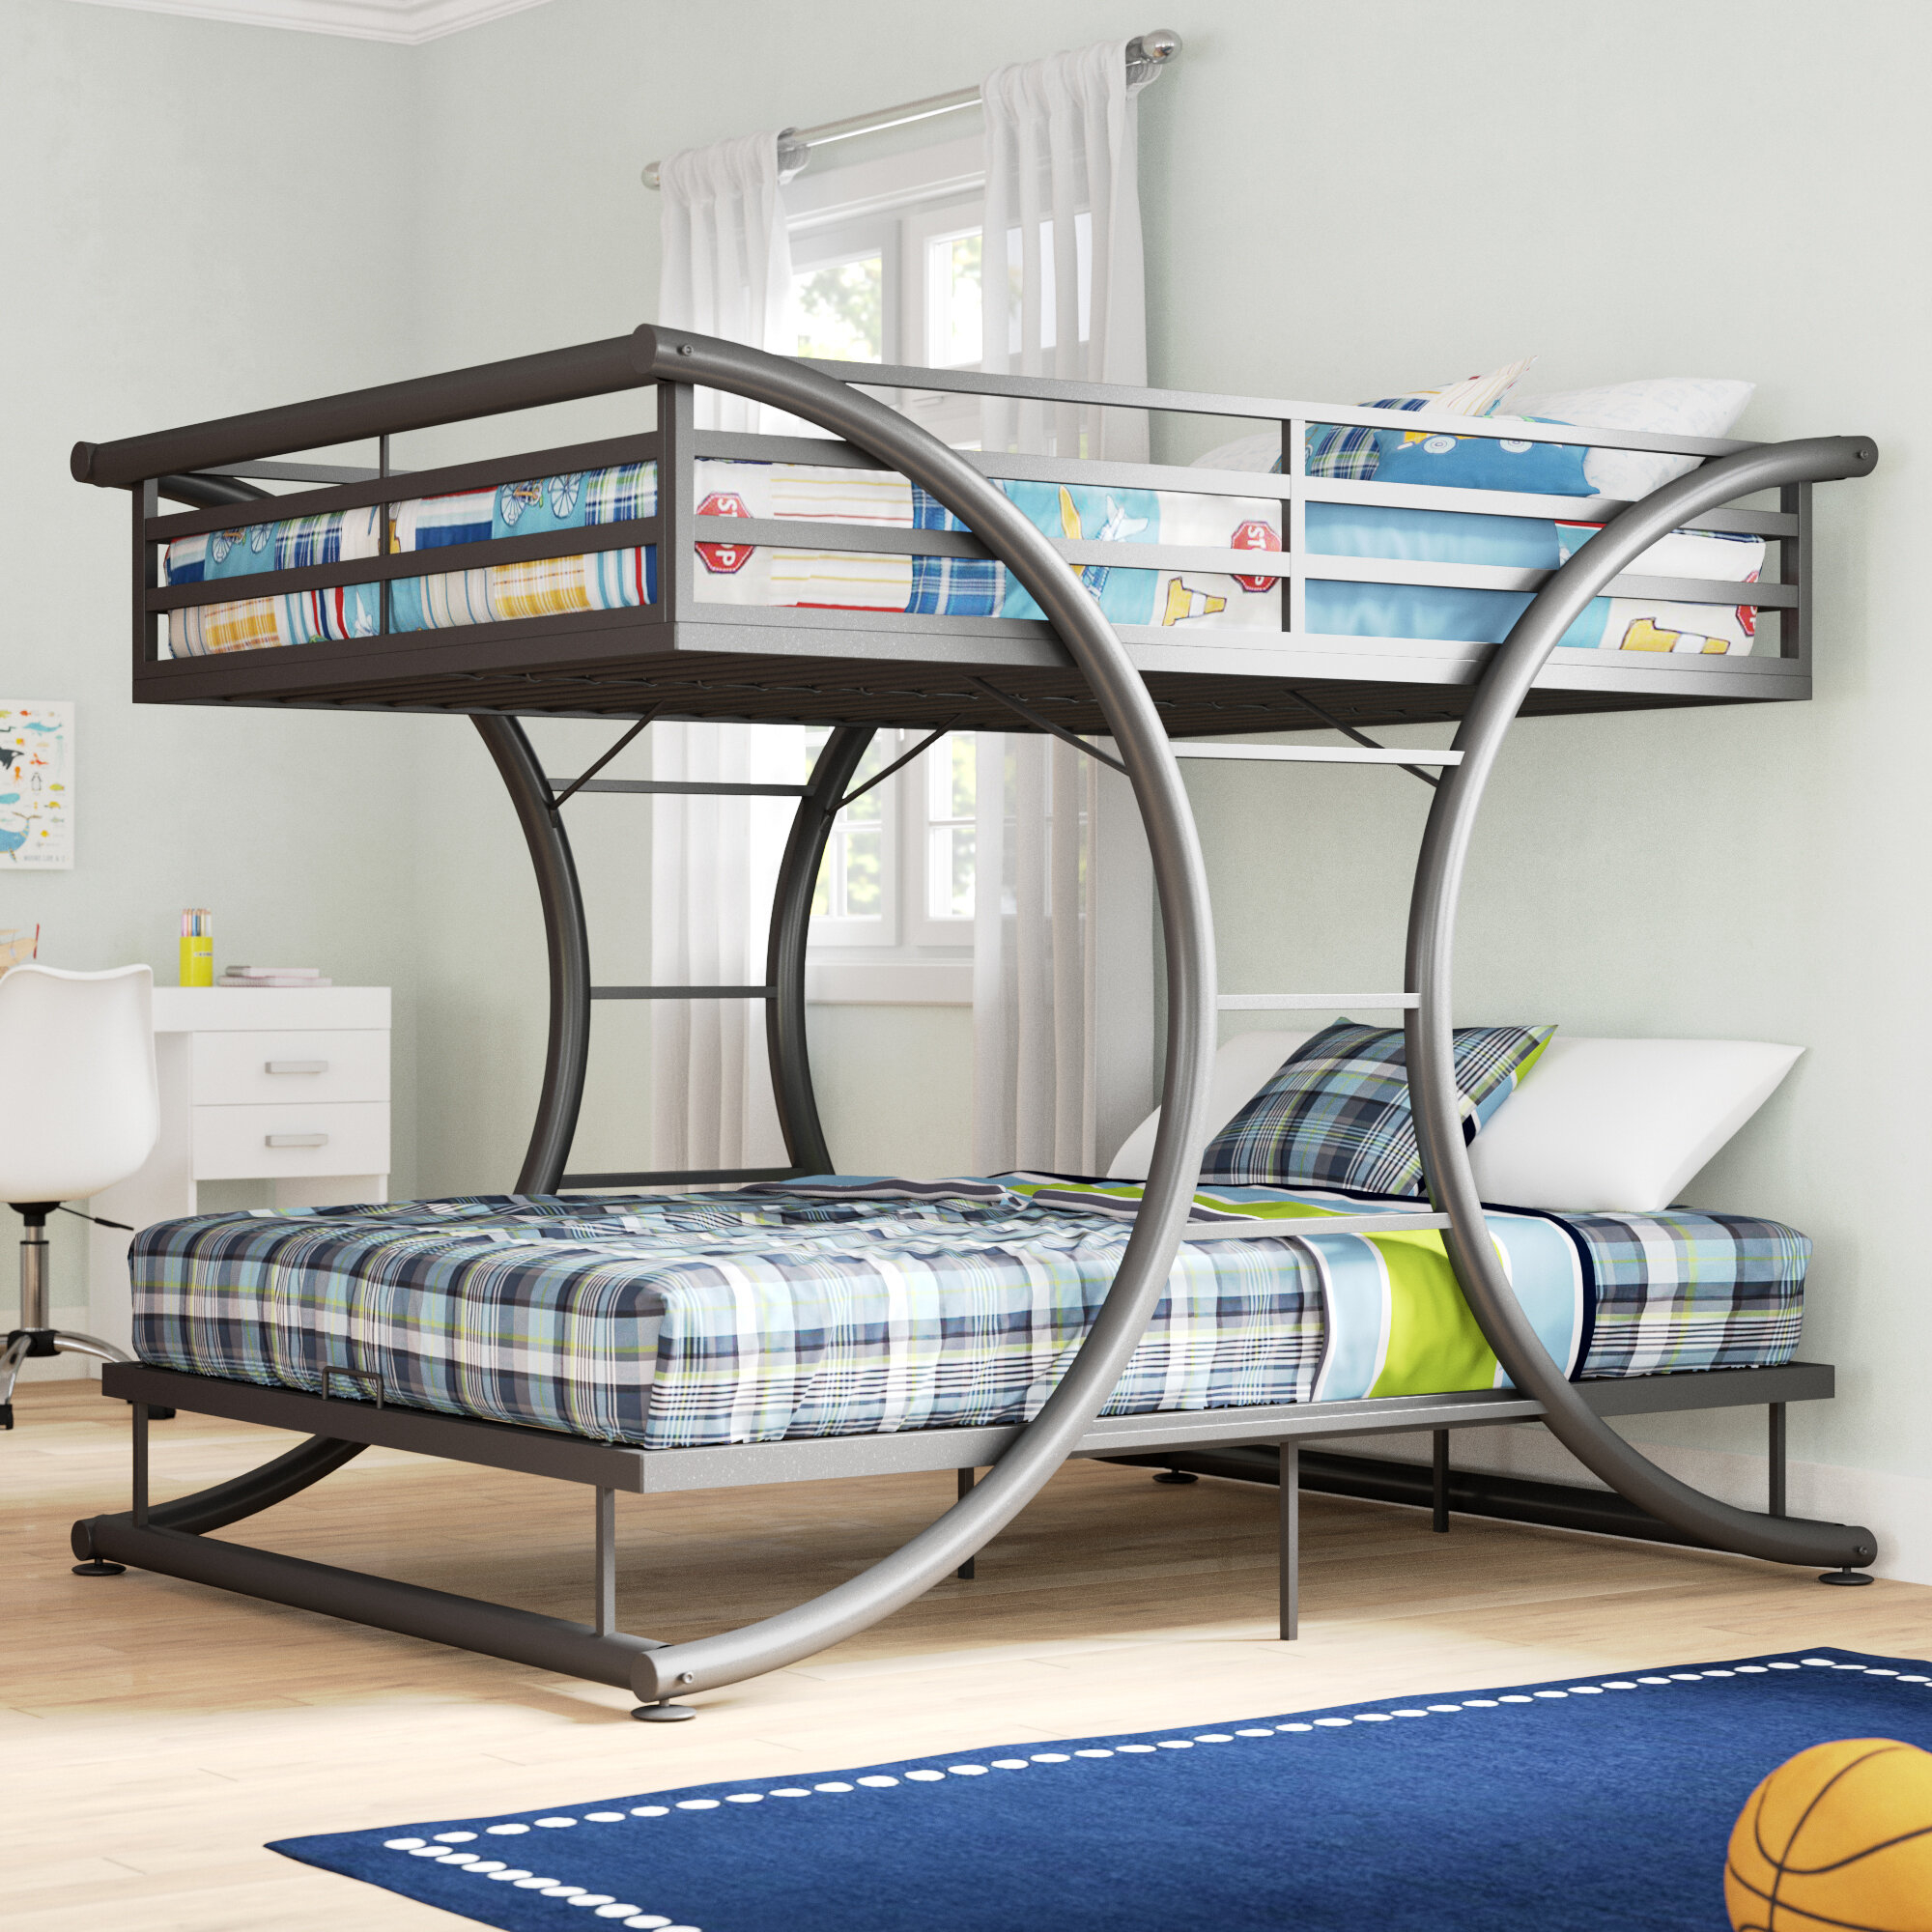 Heavy Duty Bunk Beds Visualhunt, Heavy Metal Full Over Full Bunk Bed